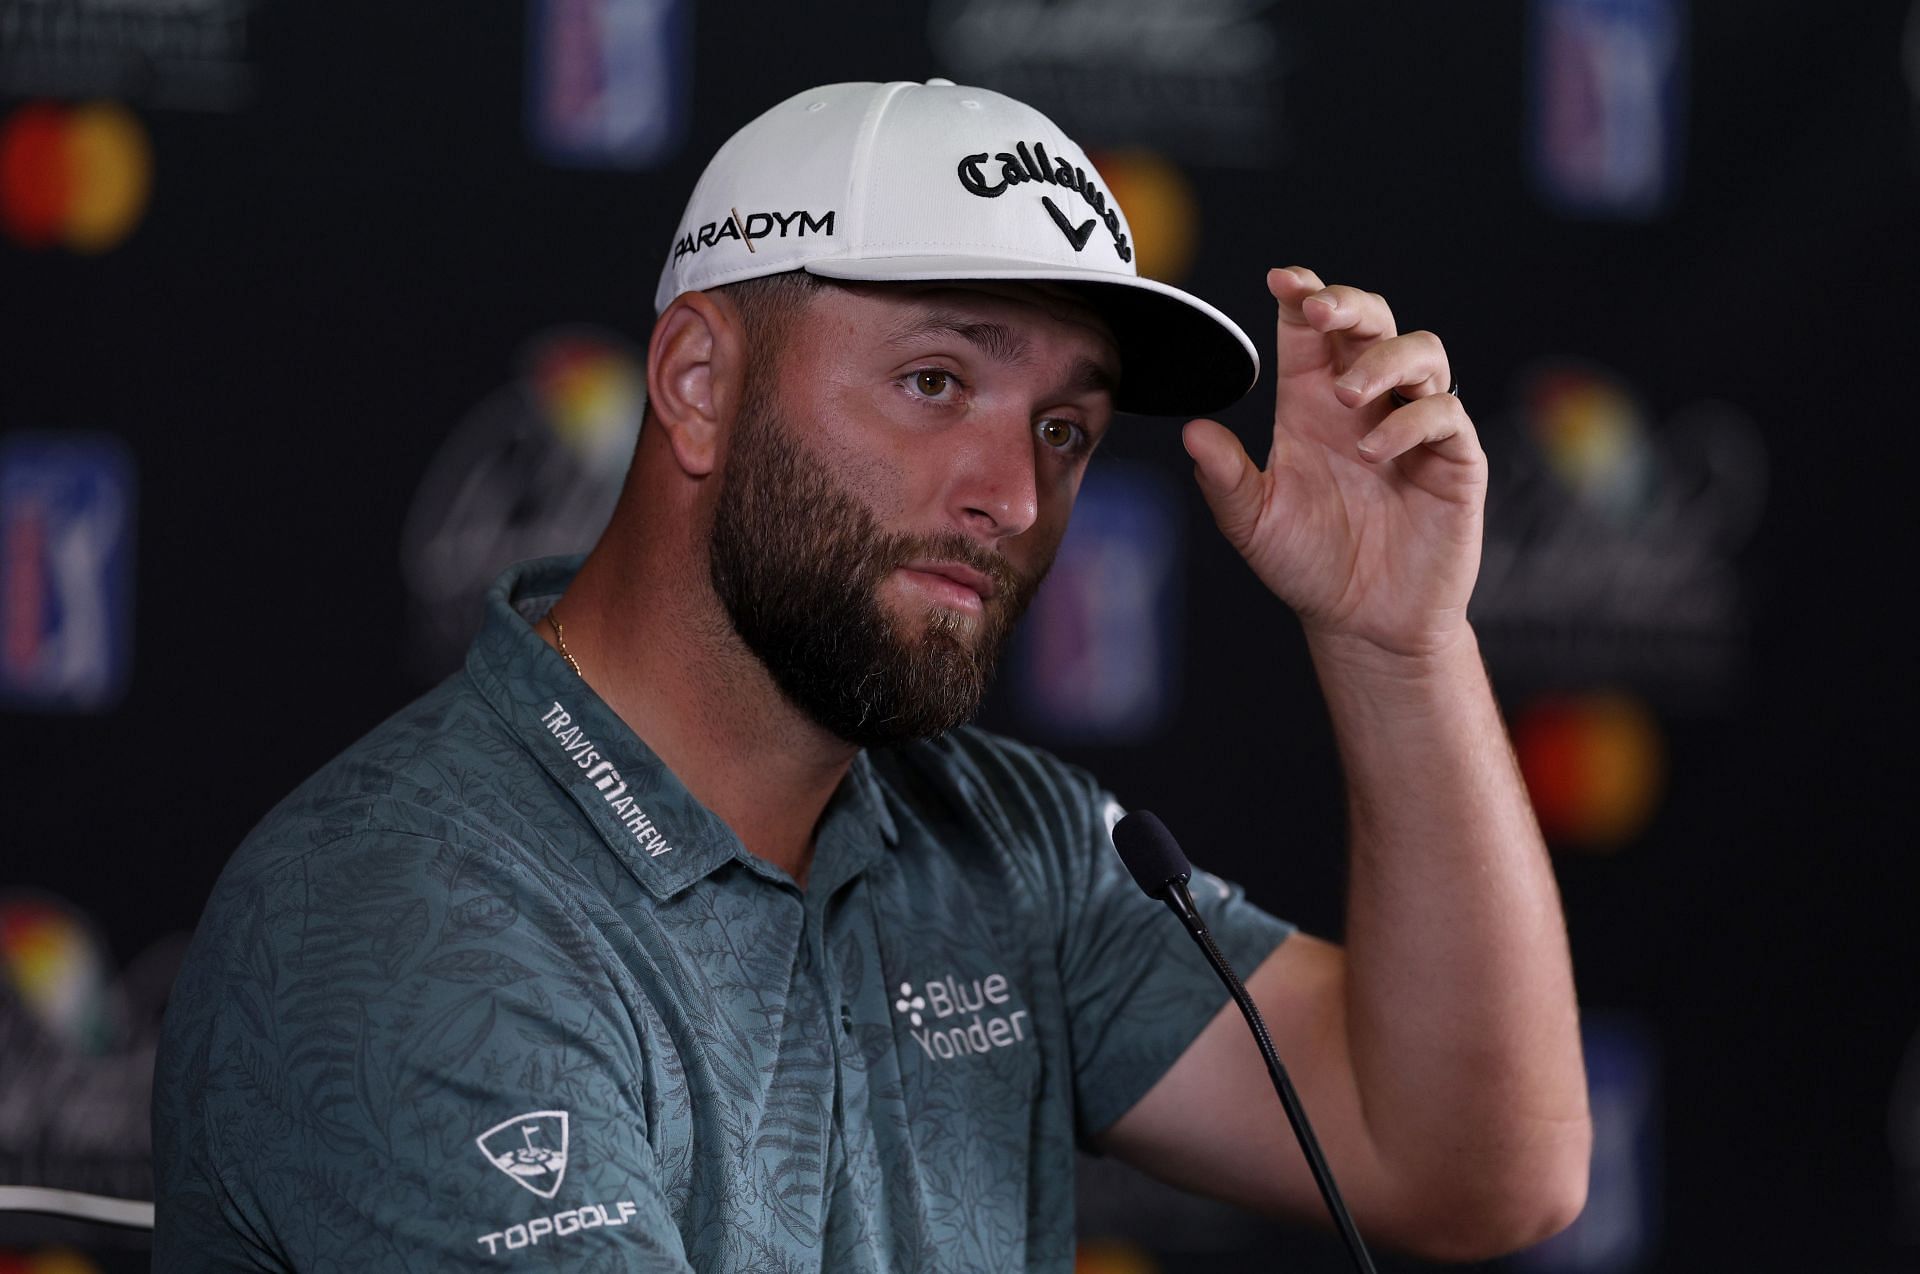 Arnold Palmer Invitational presented by Mastercard - Previews